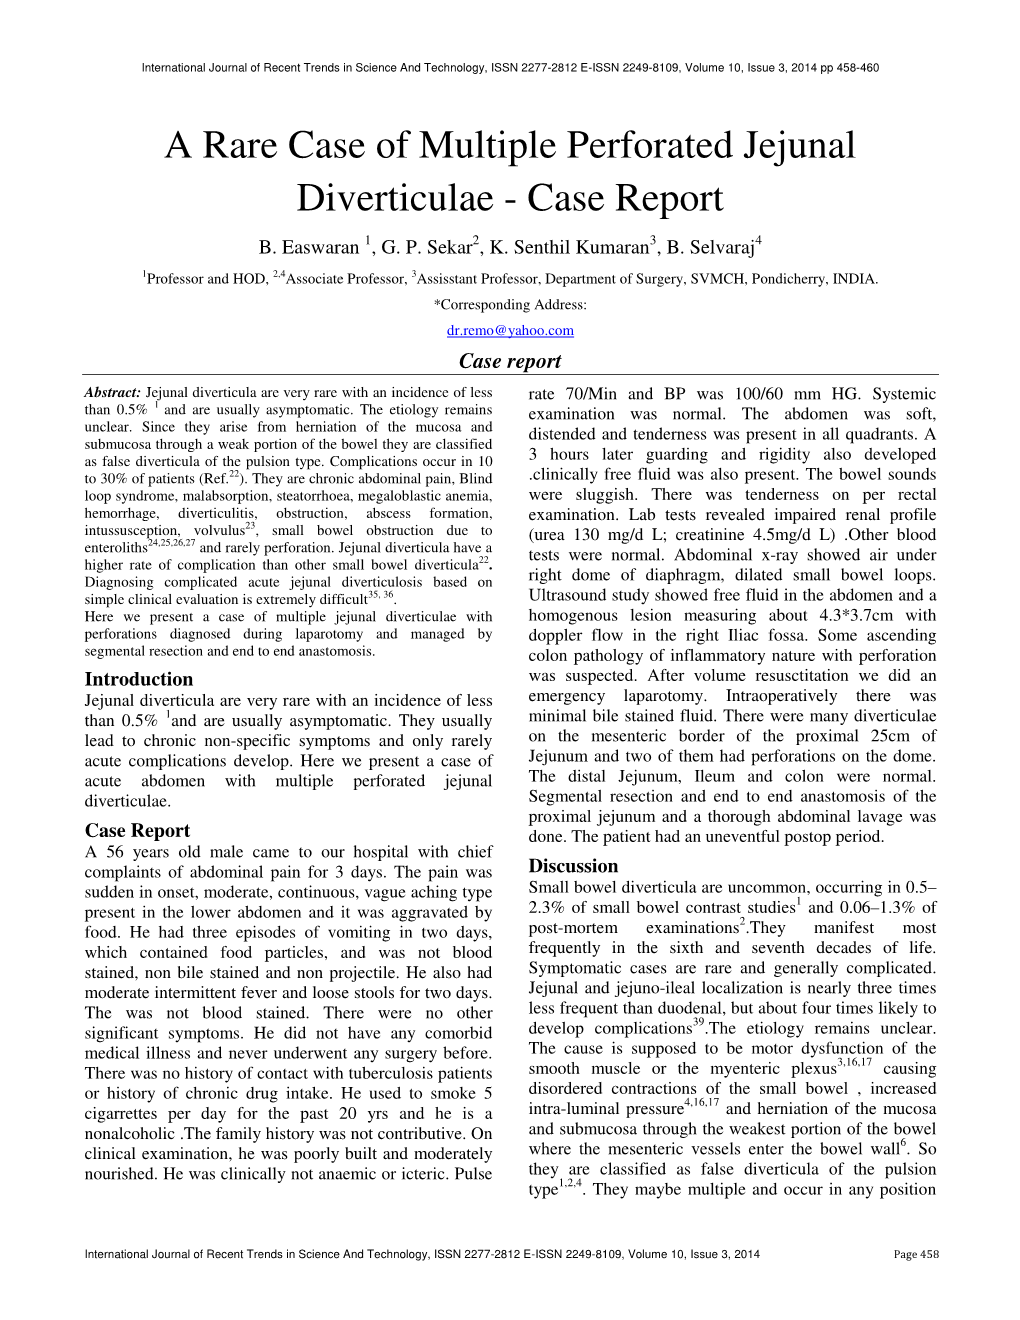 A Rare Case of Multiple Perforated Jejunal Diverticulae - Case Report